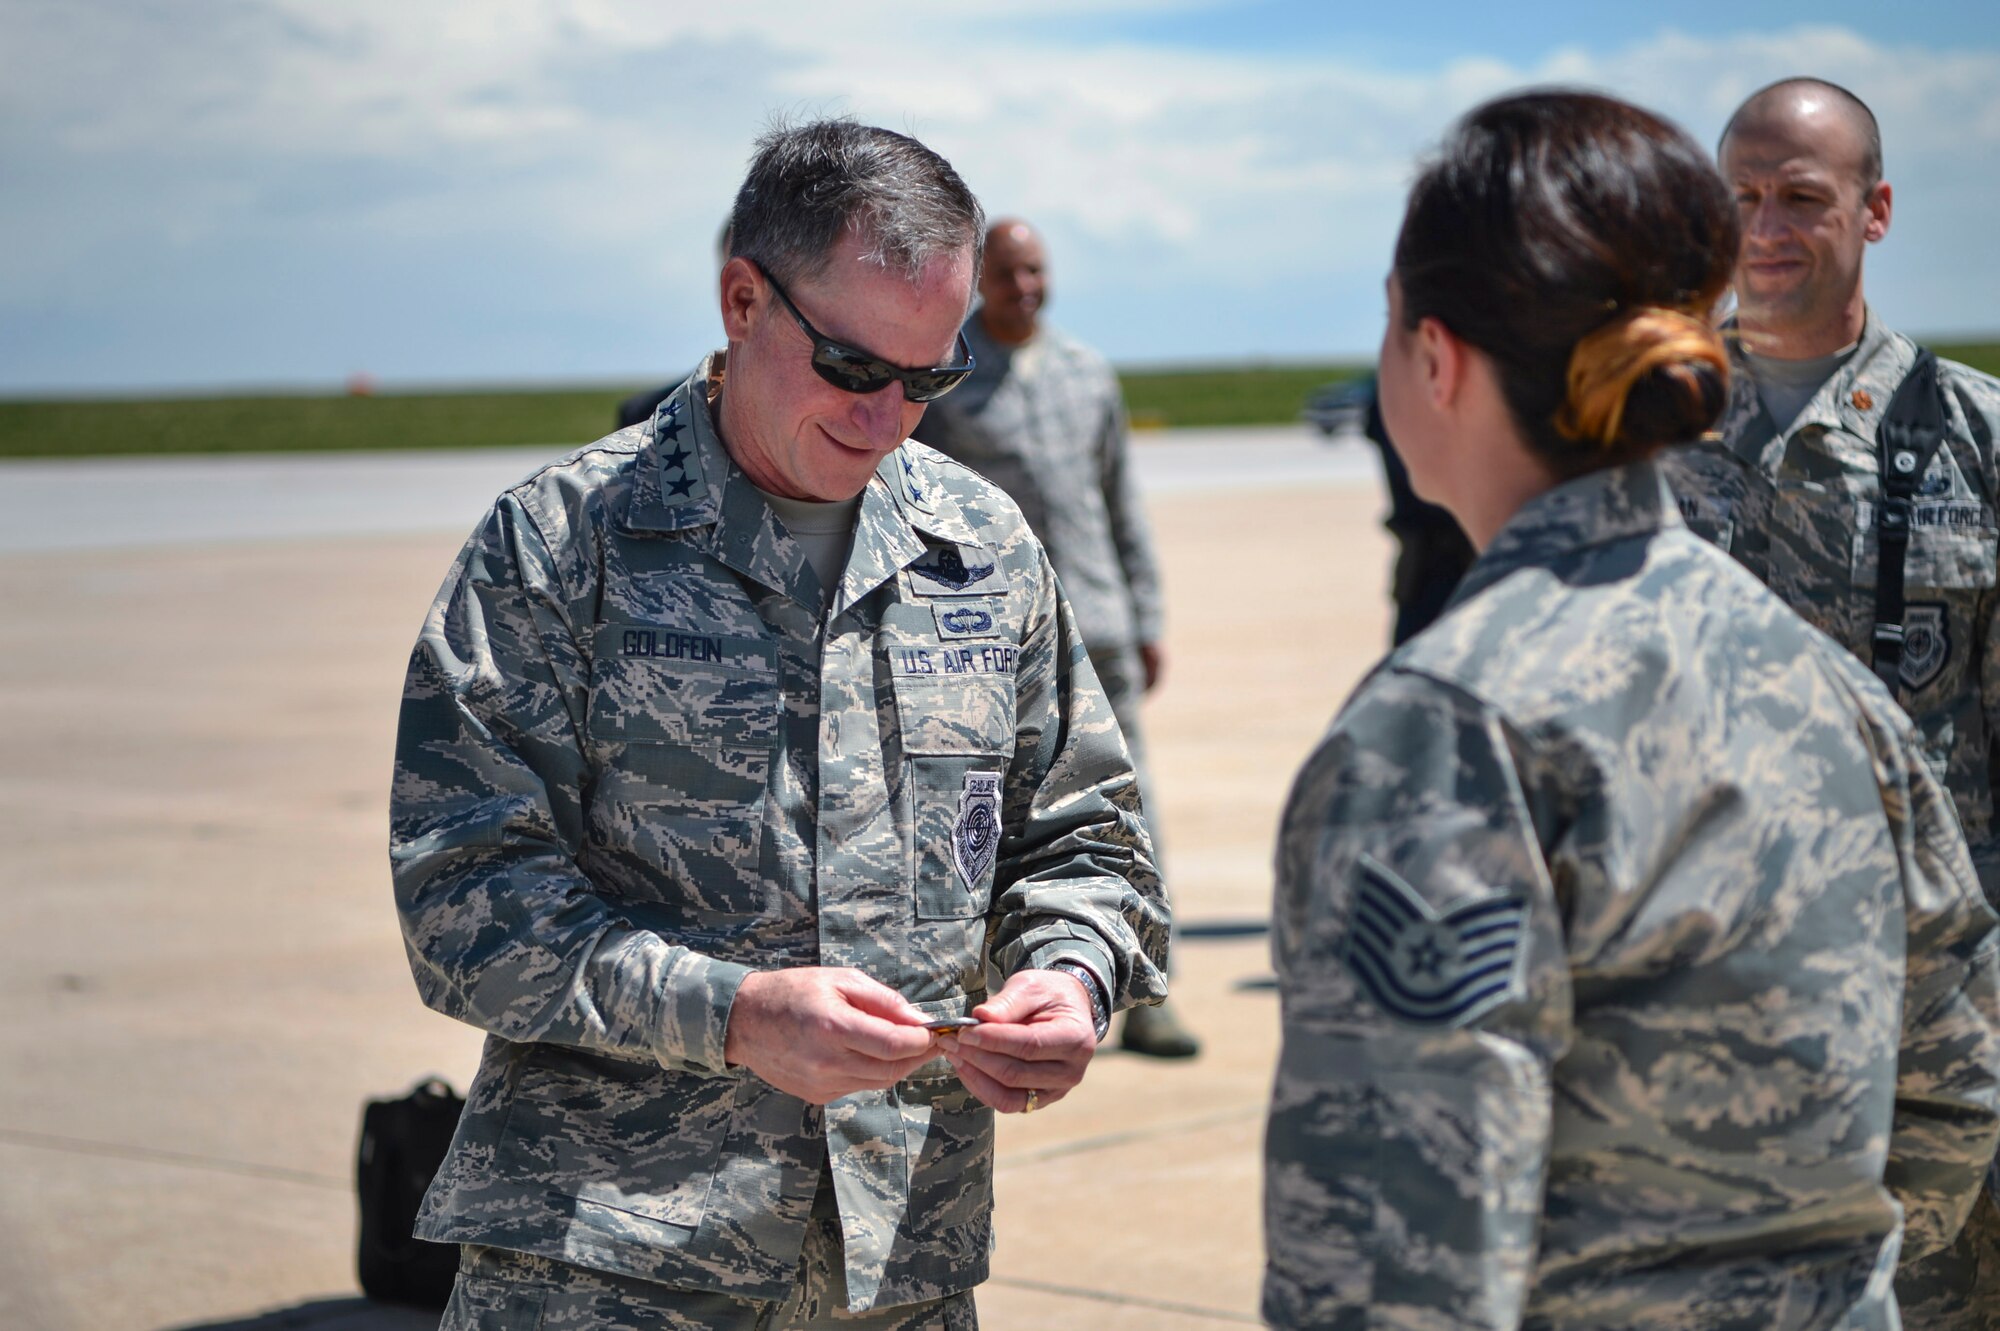 Gen. David L. Goldfein, Chief of Staff of the U.S. Air Force, receives a 140th Medical Group coin from Tech Sgt. Adrianna Jakupi, 140th MDG 140th readiness and training NCO, May 25, 2017, on Buckley Air Force Base, Colo. Jakupi briefed Goldfein on the mission capabilities of the National Guard Chemical, Biological, Radiological, Nuclear and High Yield Explosive Enhanced Response Force Package. (U.S. Air Force photo by Airman 1st Class Holden S. Faul/ Released)